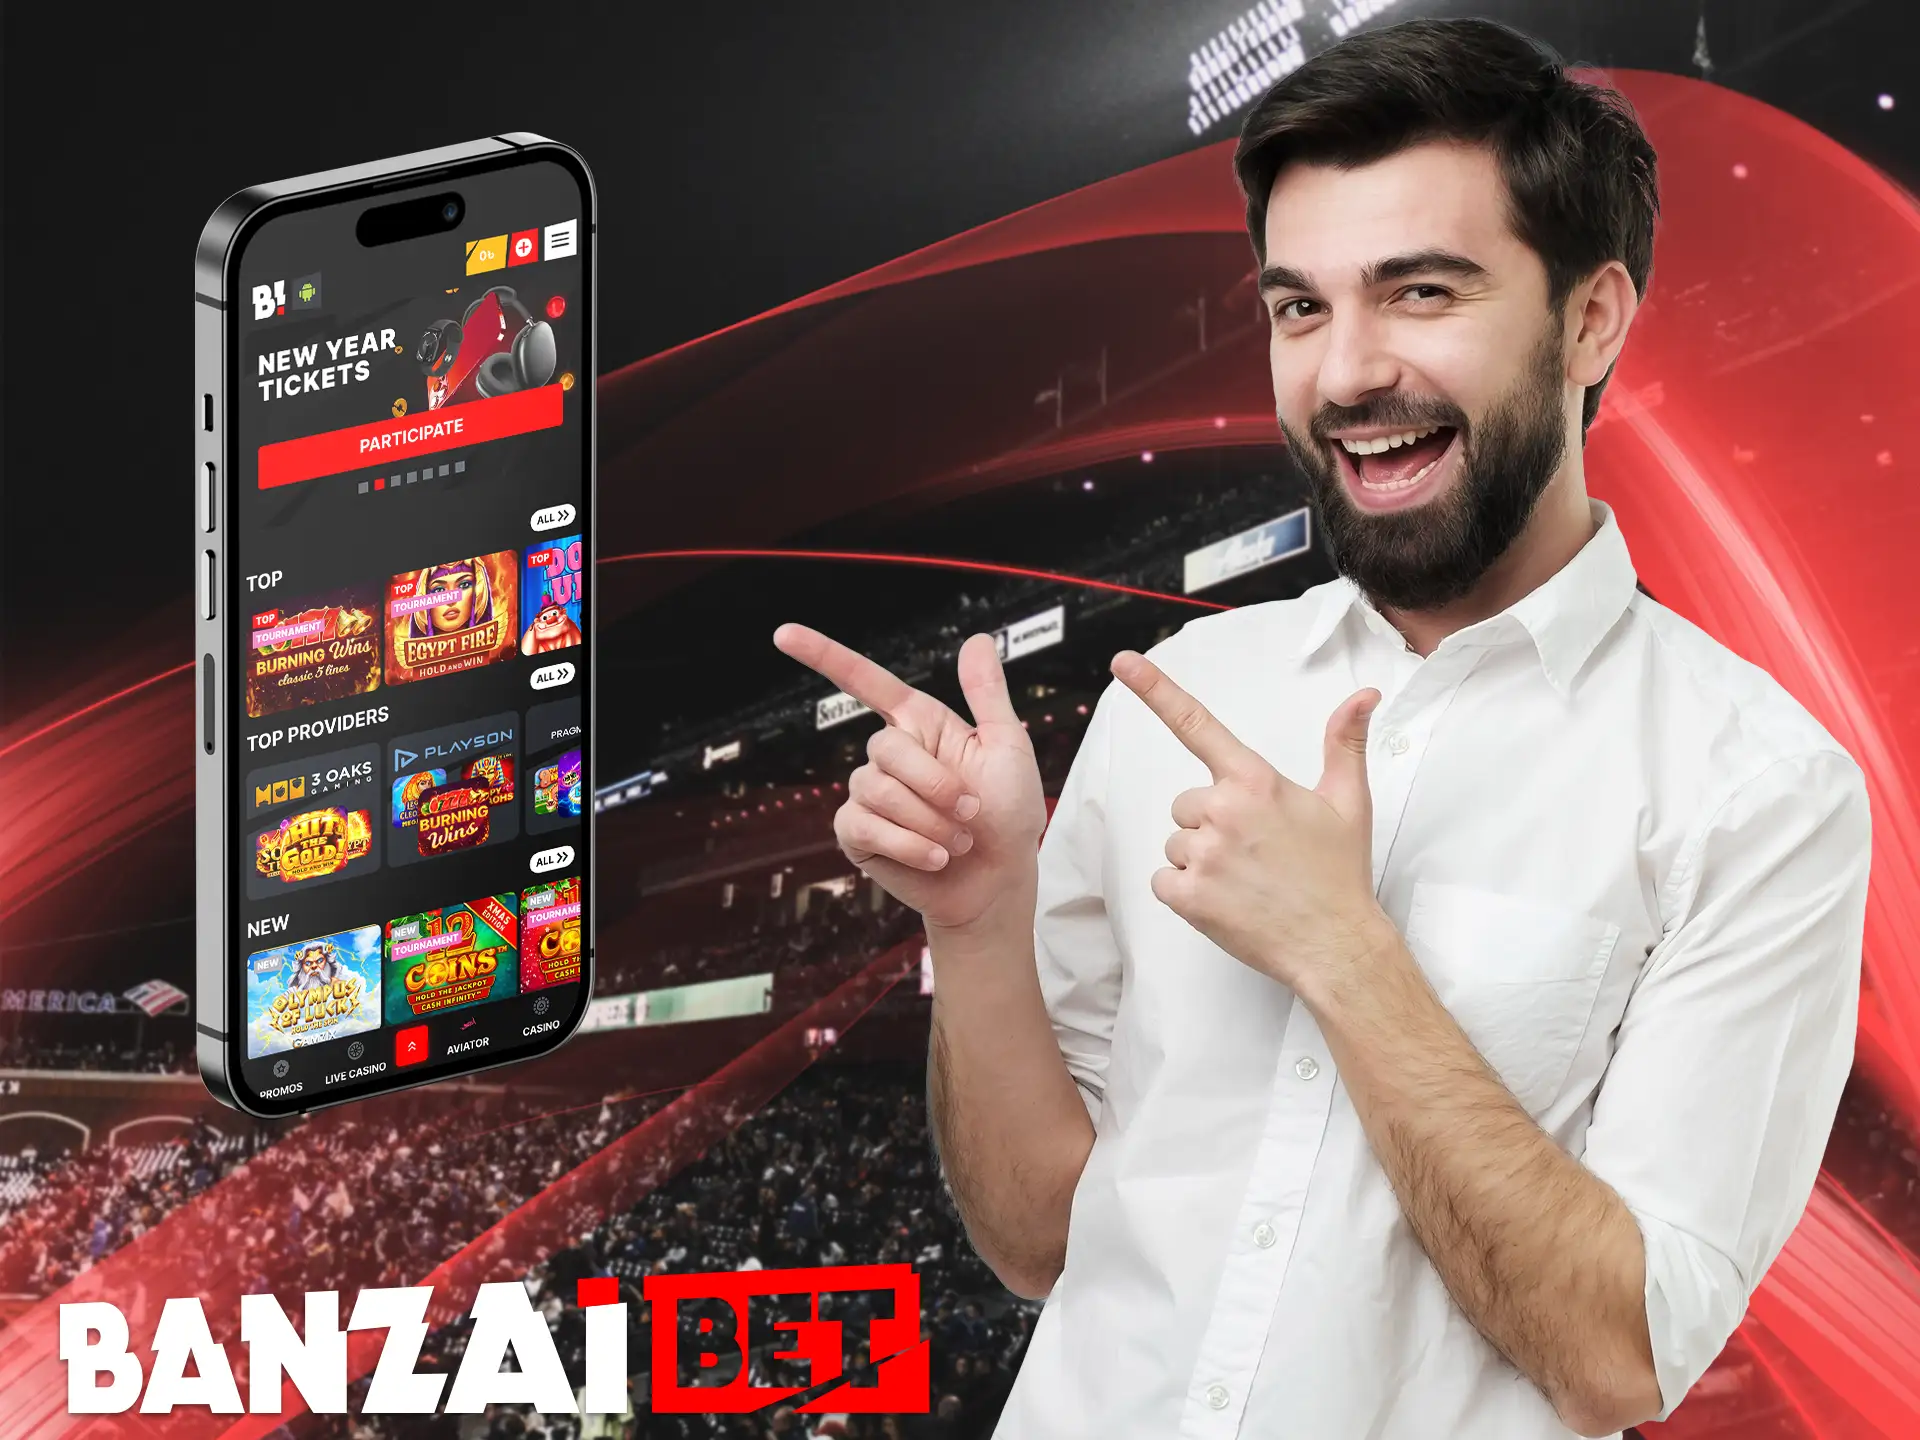 Bangladesh players have the chance to dive into the world of betting with their smartphone, thanks to the fast and secure Banzai App.